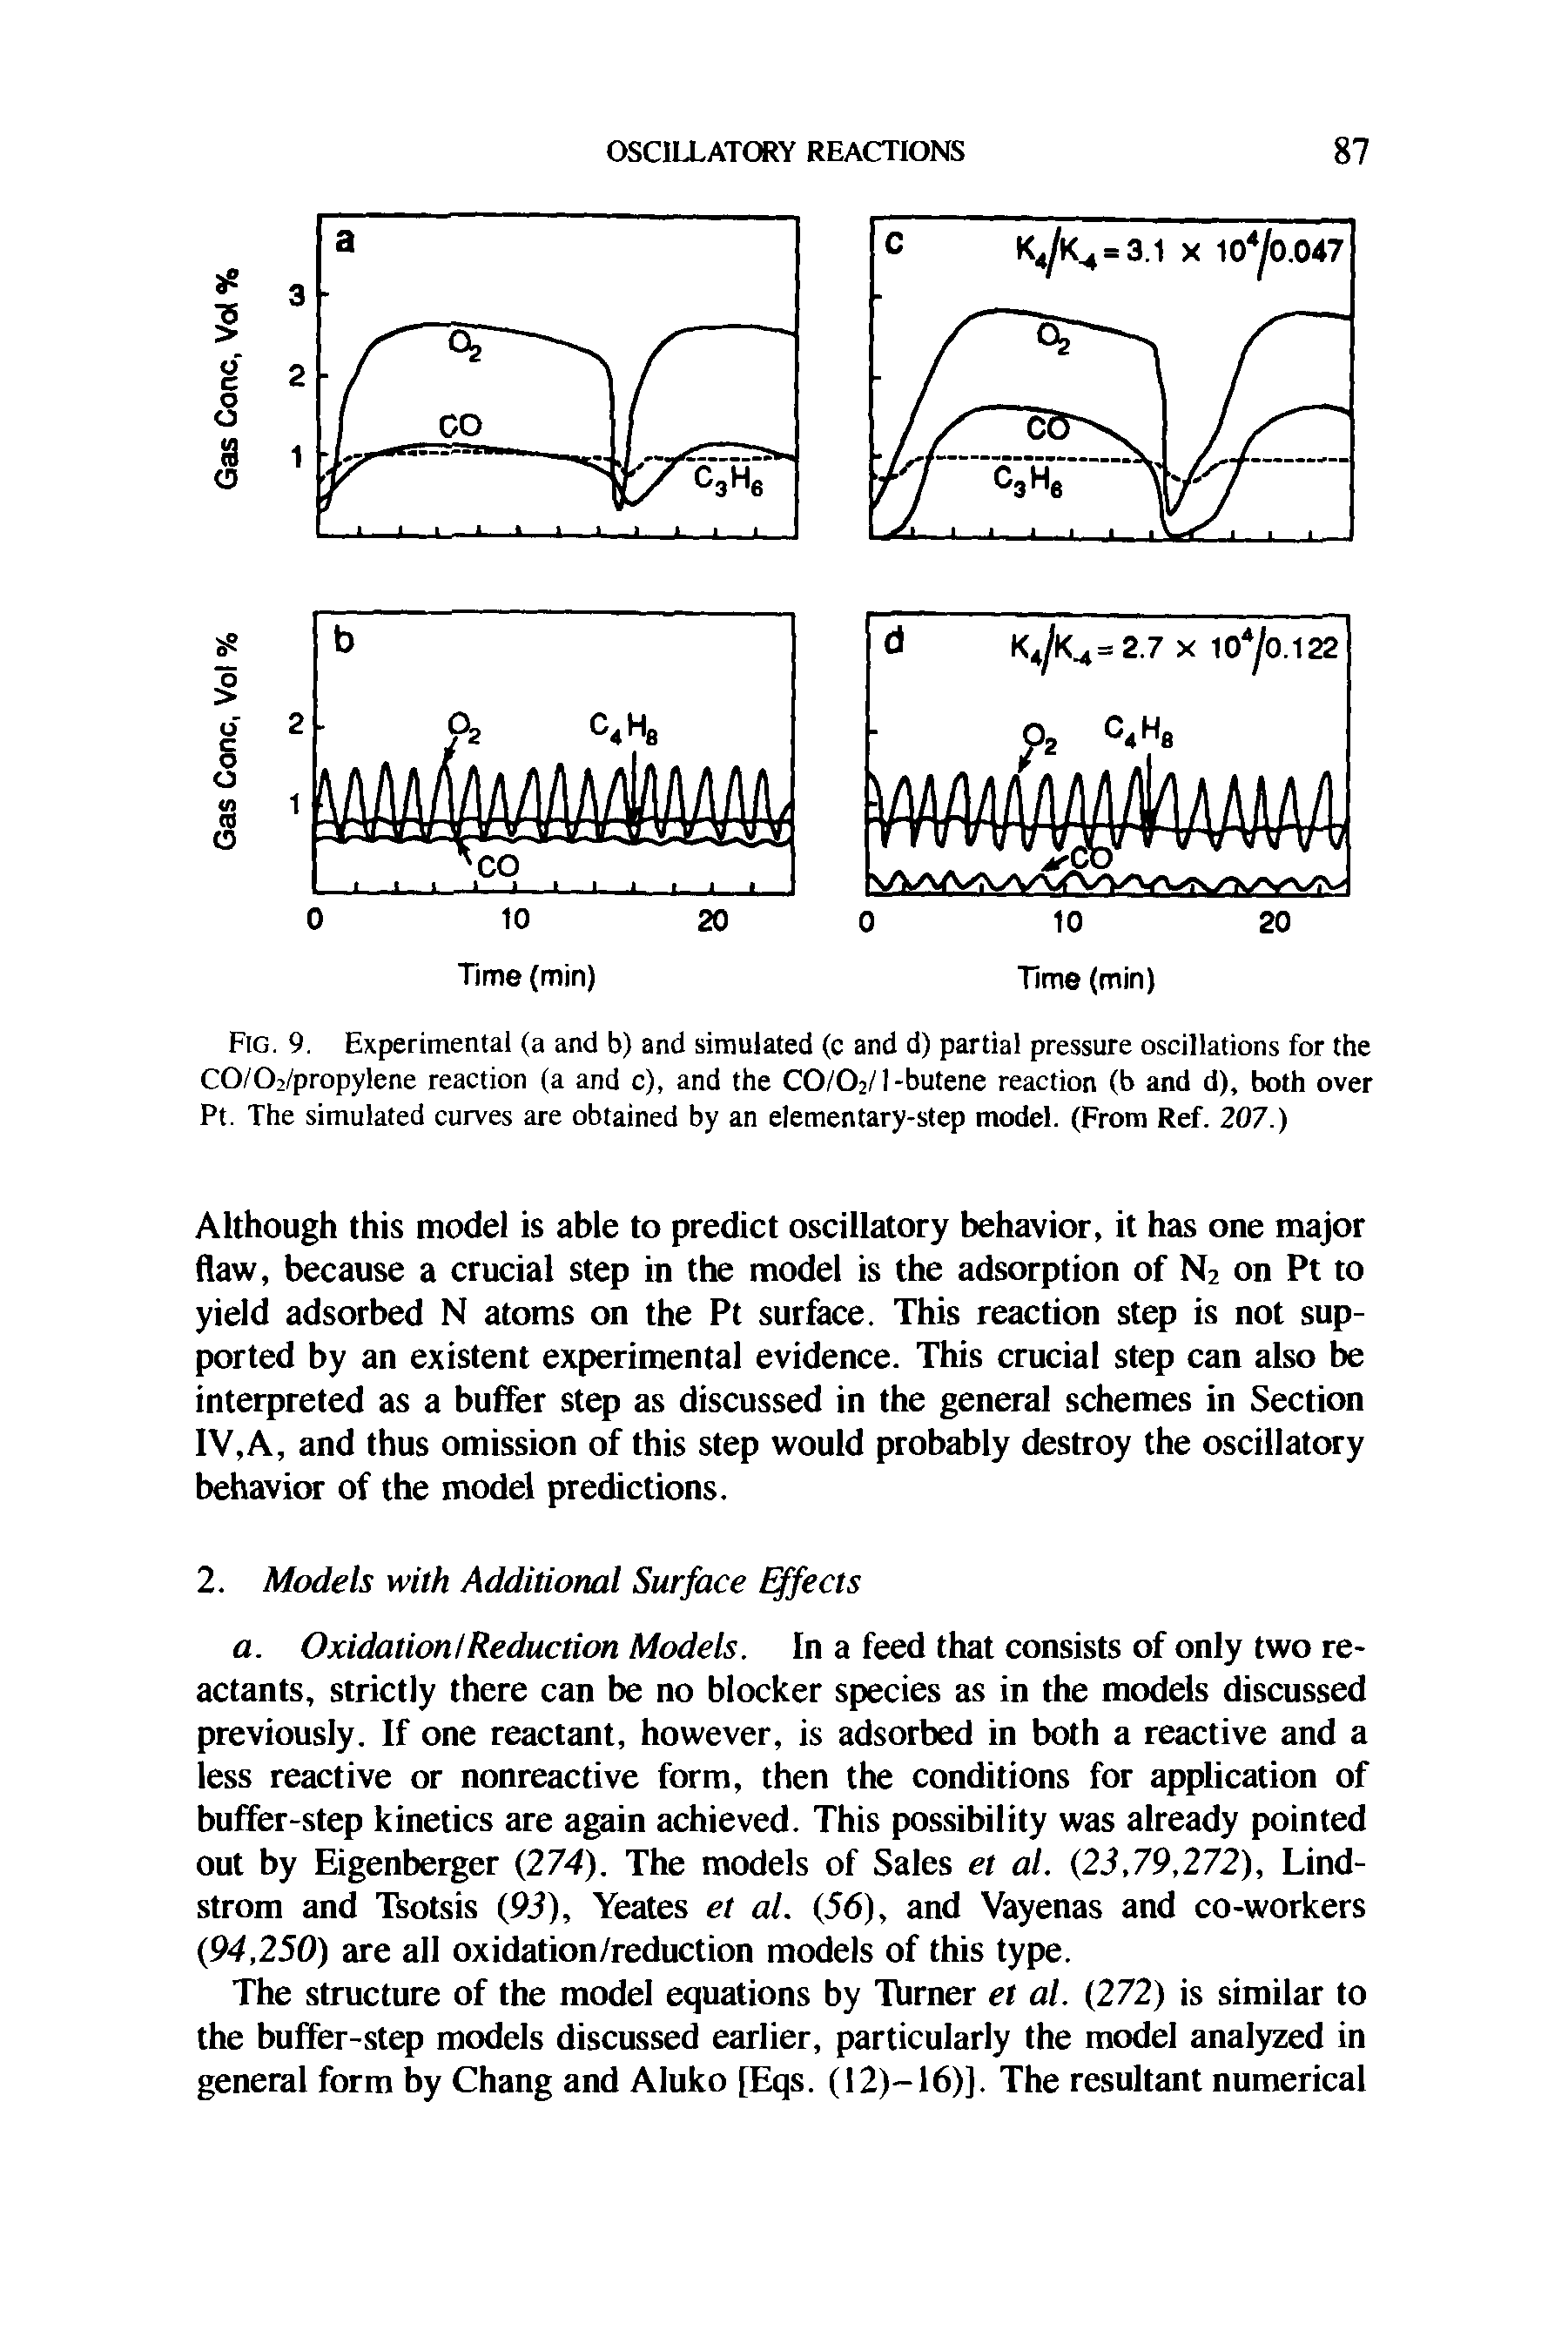 Fig. 9. Experimental (a and b) and simulated (c and d) partial pressure oscillations for the CO/02/propylene reaction (a and c), and the CO/O2/1-butene reaction (b and d), both over Pt. The simulated curves are obtained by an elementary-step model. (From Ref. 207.)...